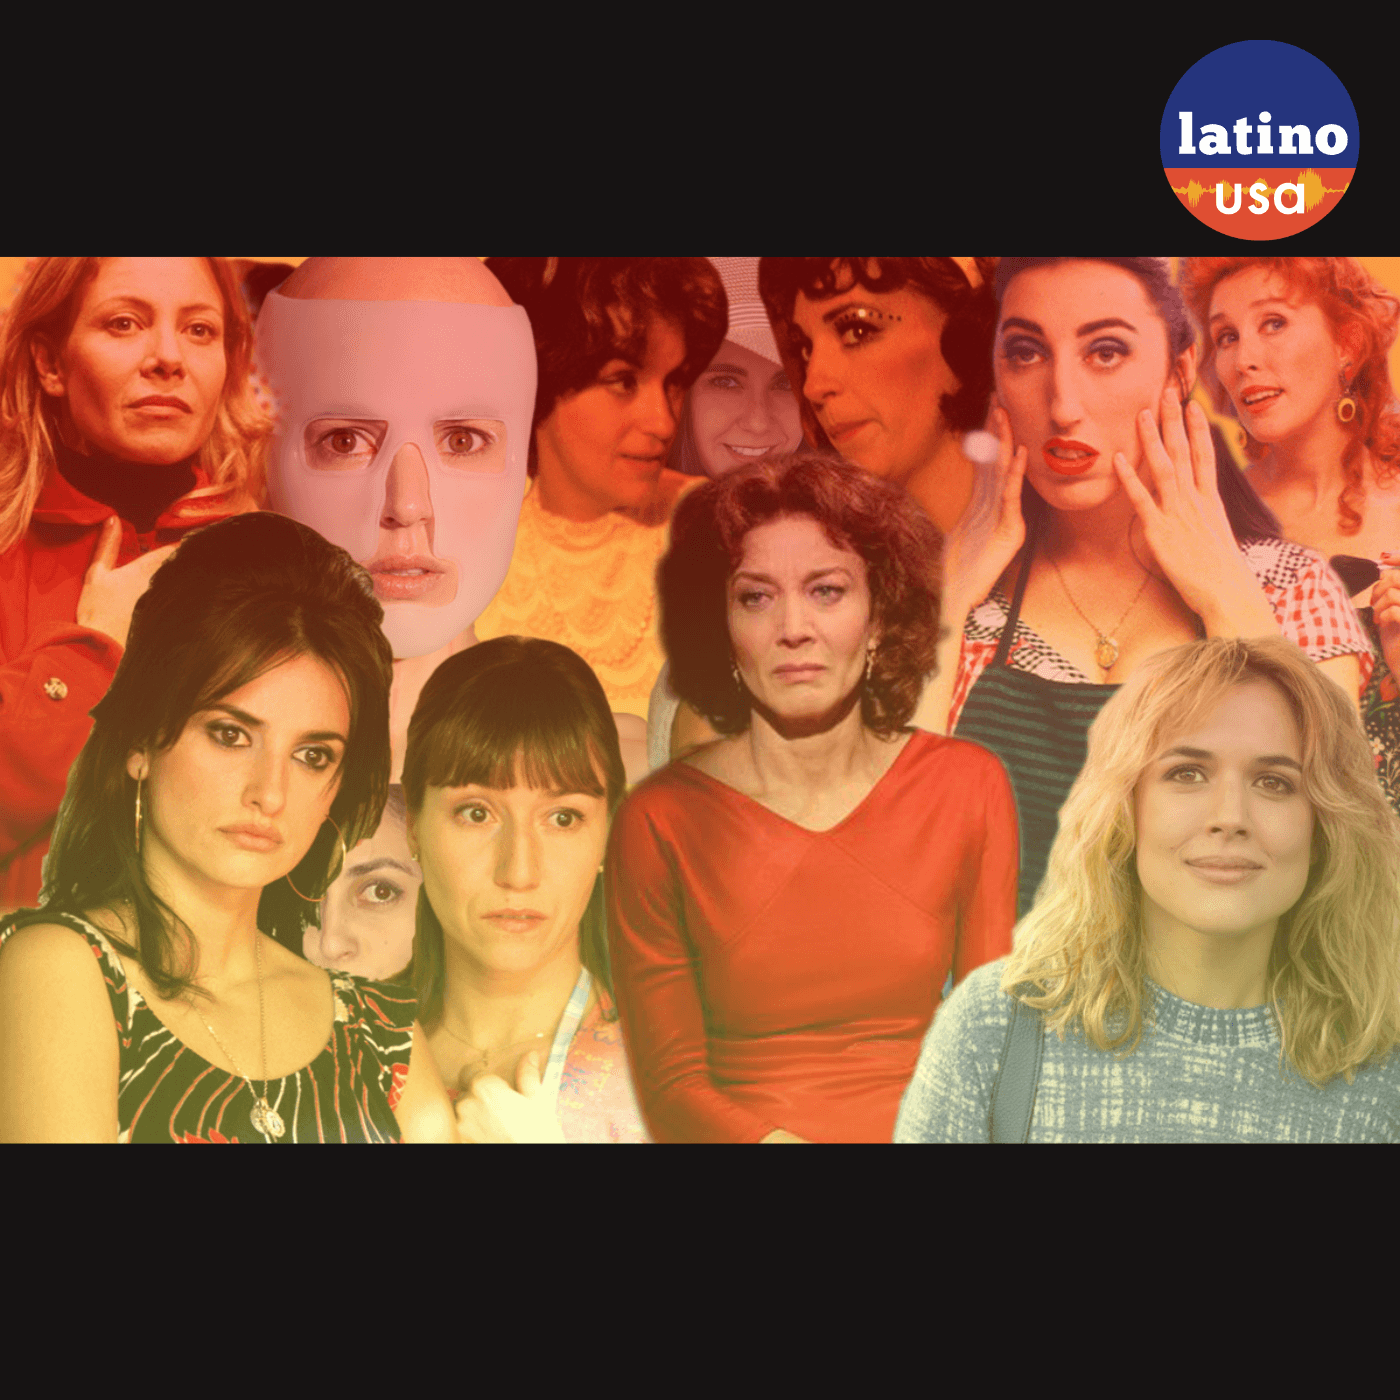 Thumbnail for "Will Watching All of Almodóvar’s Movies Make You More Neurotic?".